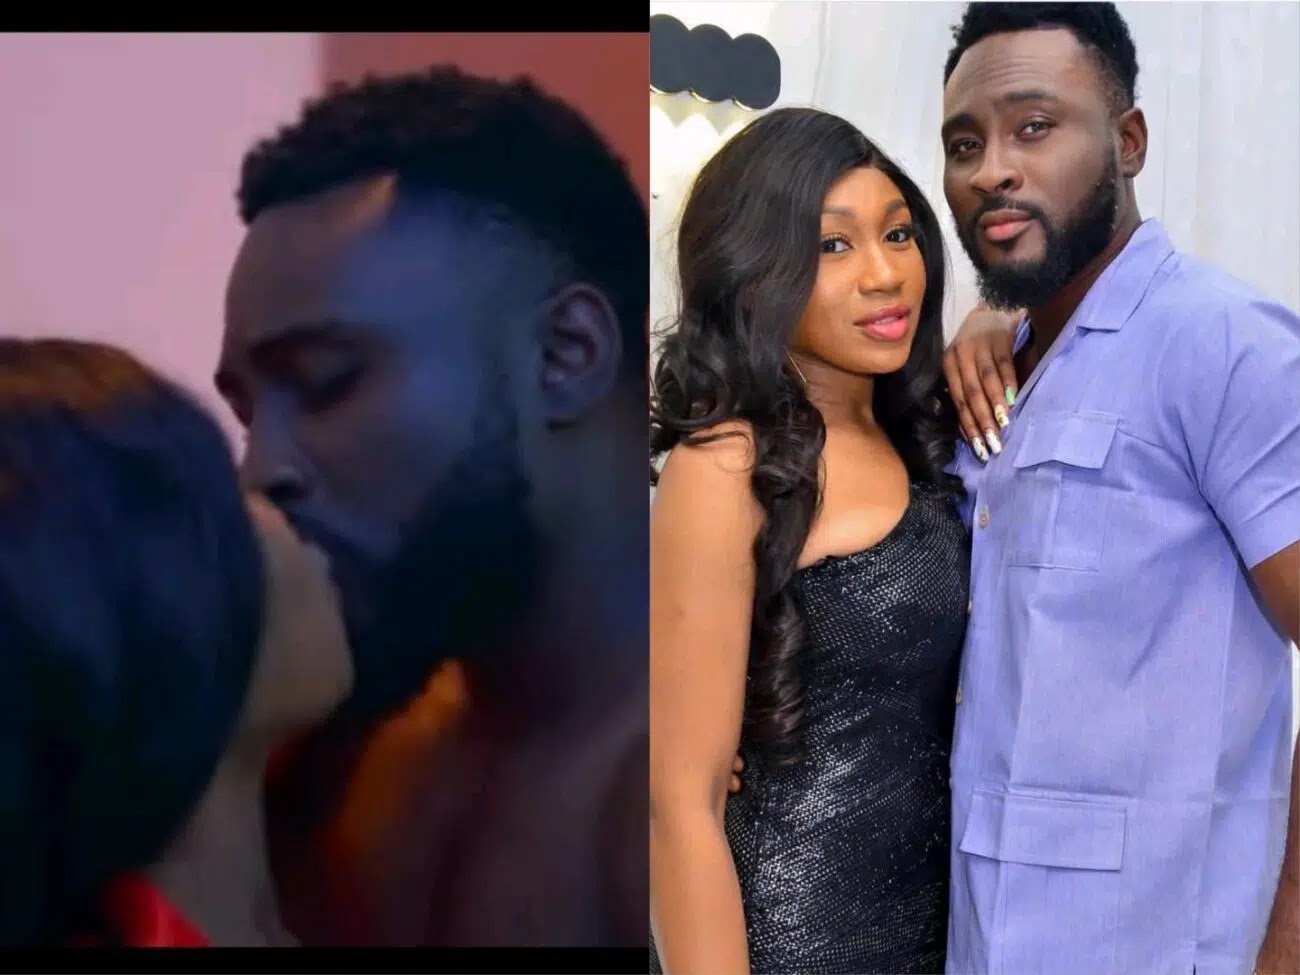 ‘The chemistry is so real’ – Fan react as Ebube Nwagbo and BBNaija Pere spark dating rumours